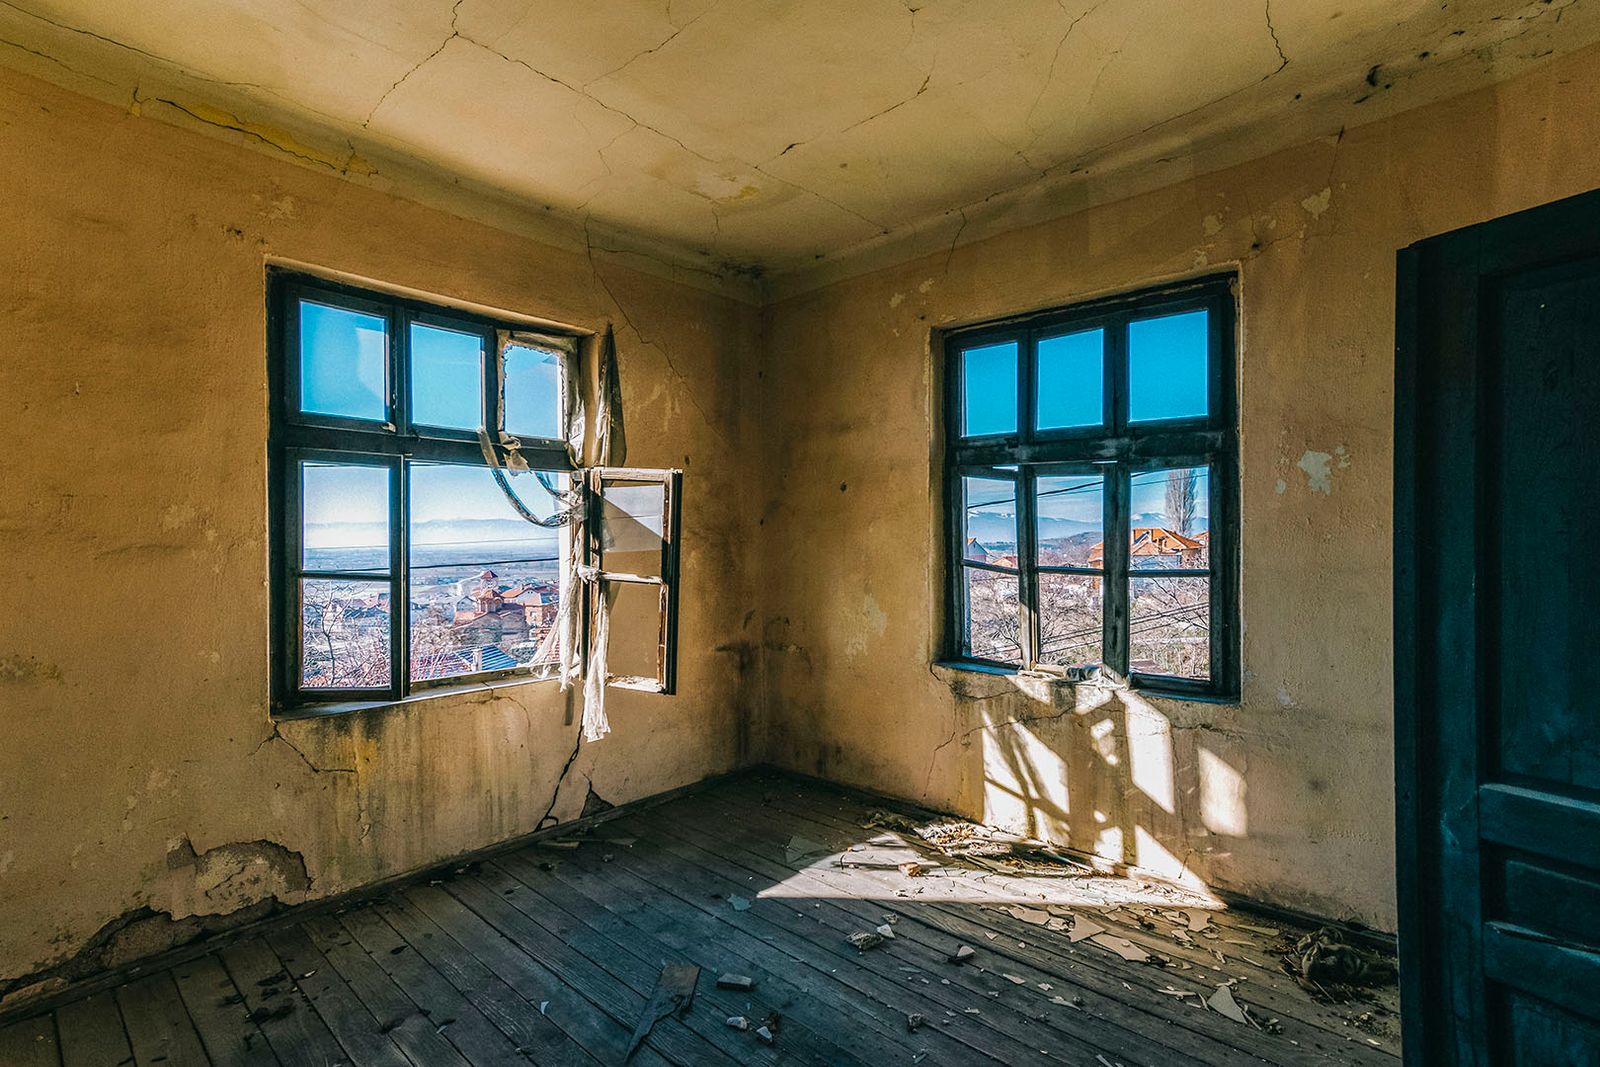 © Meri Boshkoska - Image from the THE MYSTERY OF ABANDONED PLACES photography project